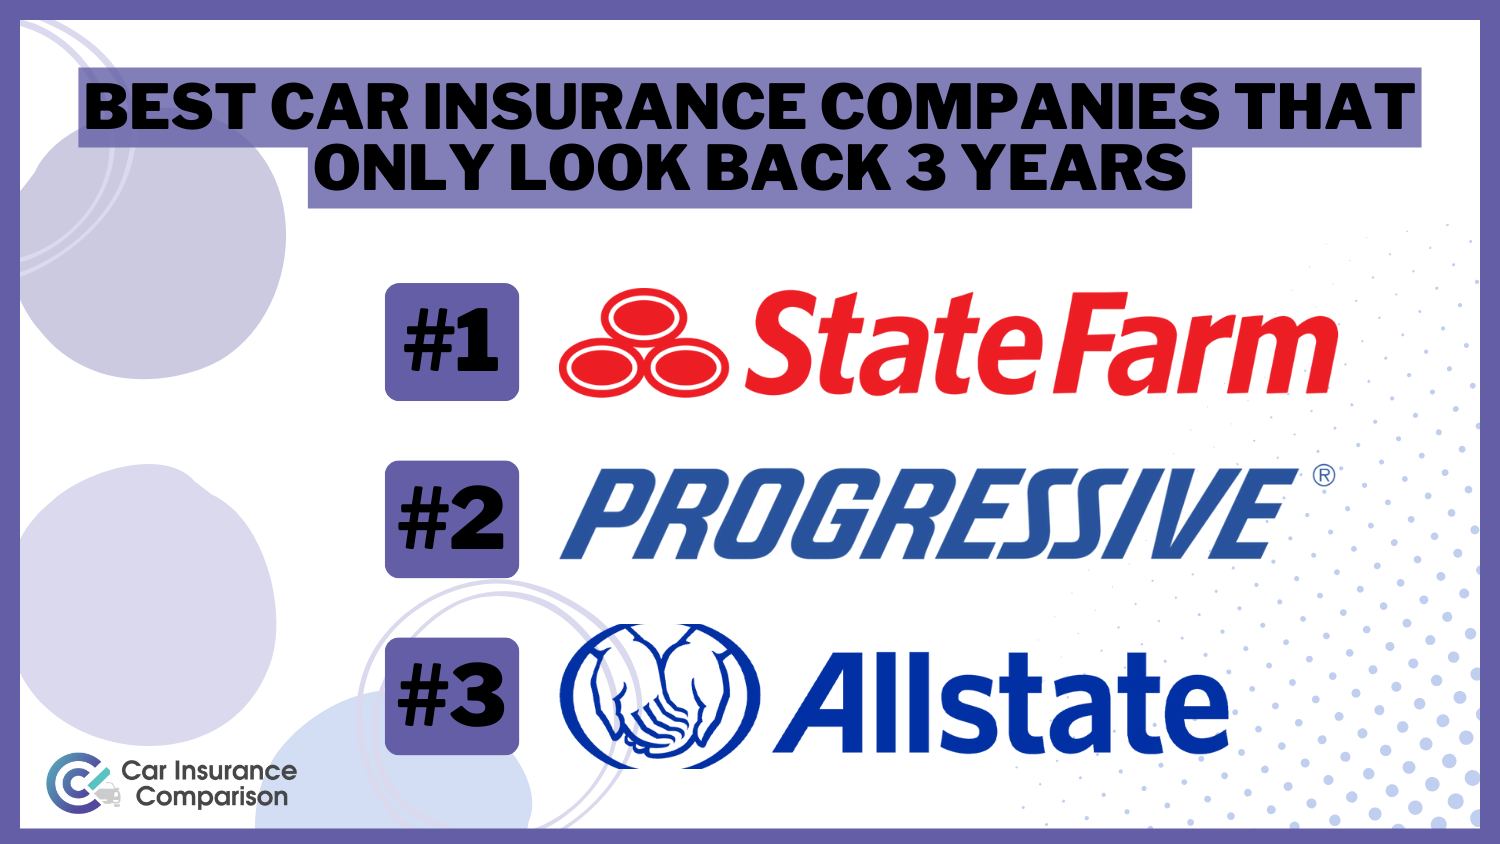 Best Car Insurance Companies That Only Look Back 3 Years in 2024 (Top 10 Picks)